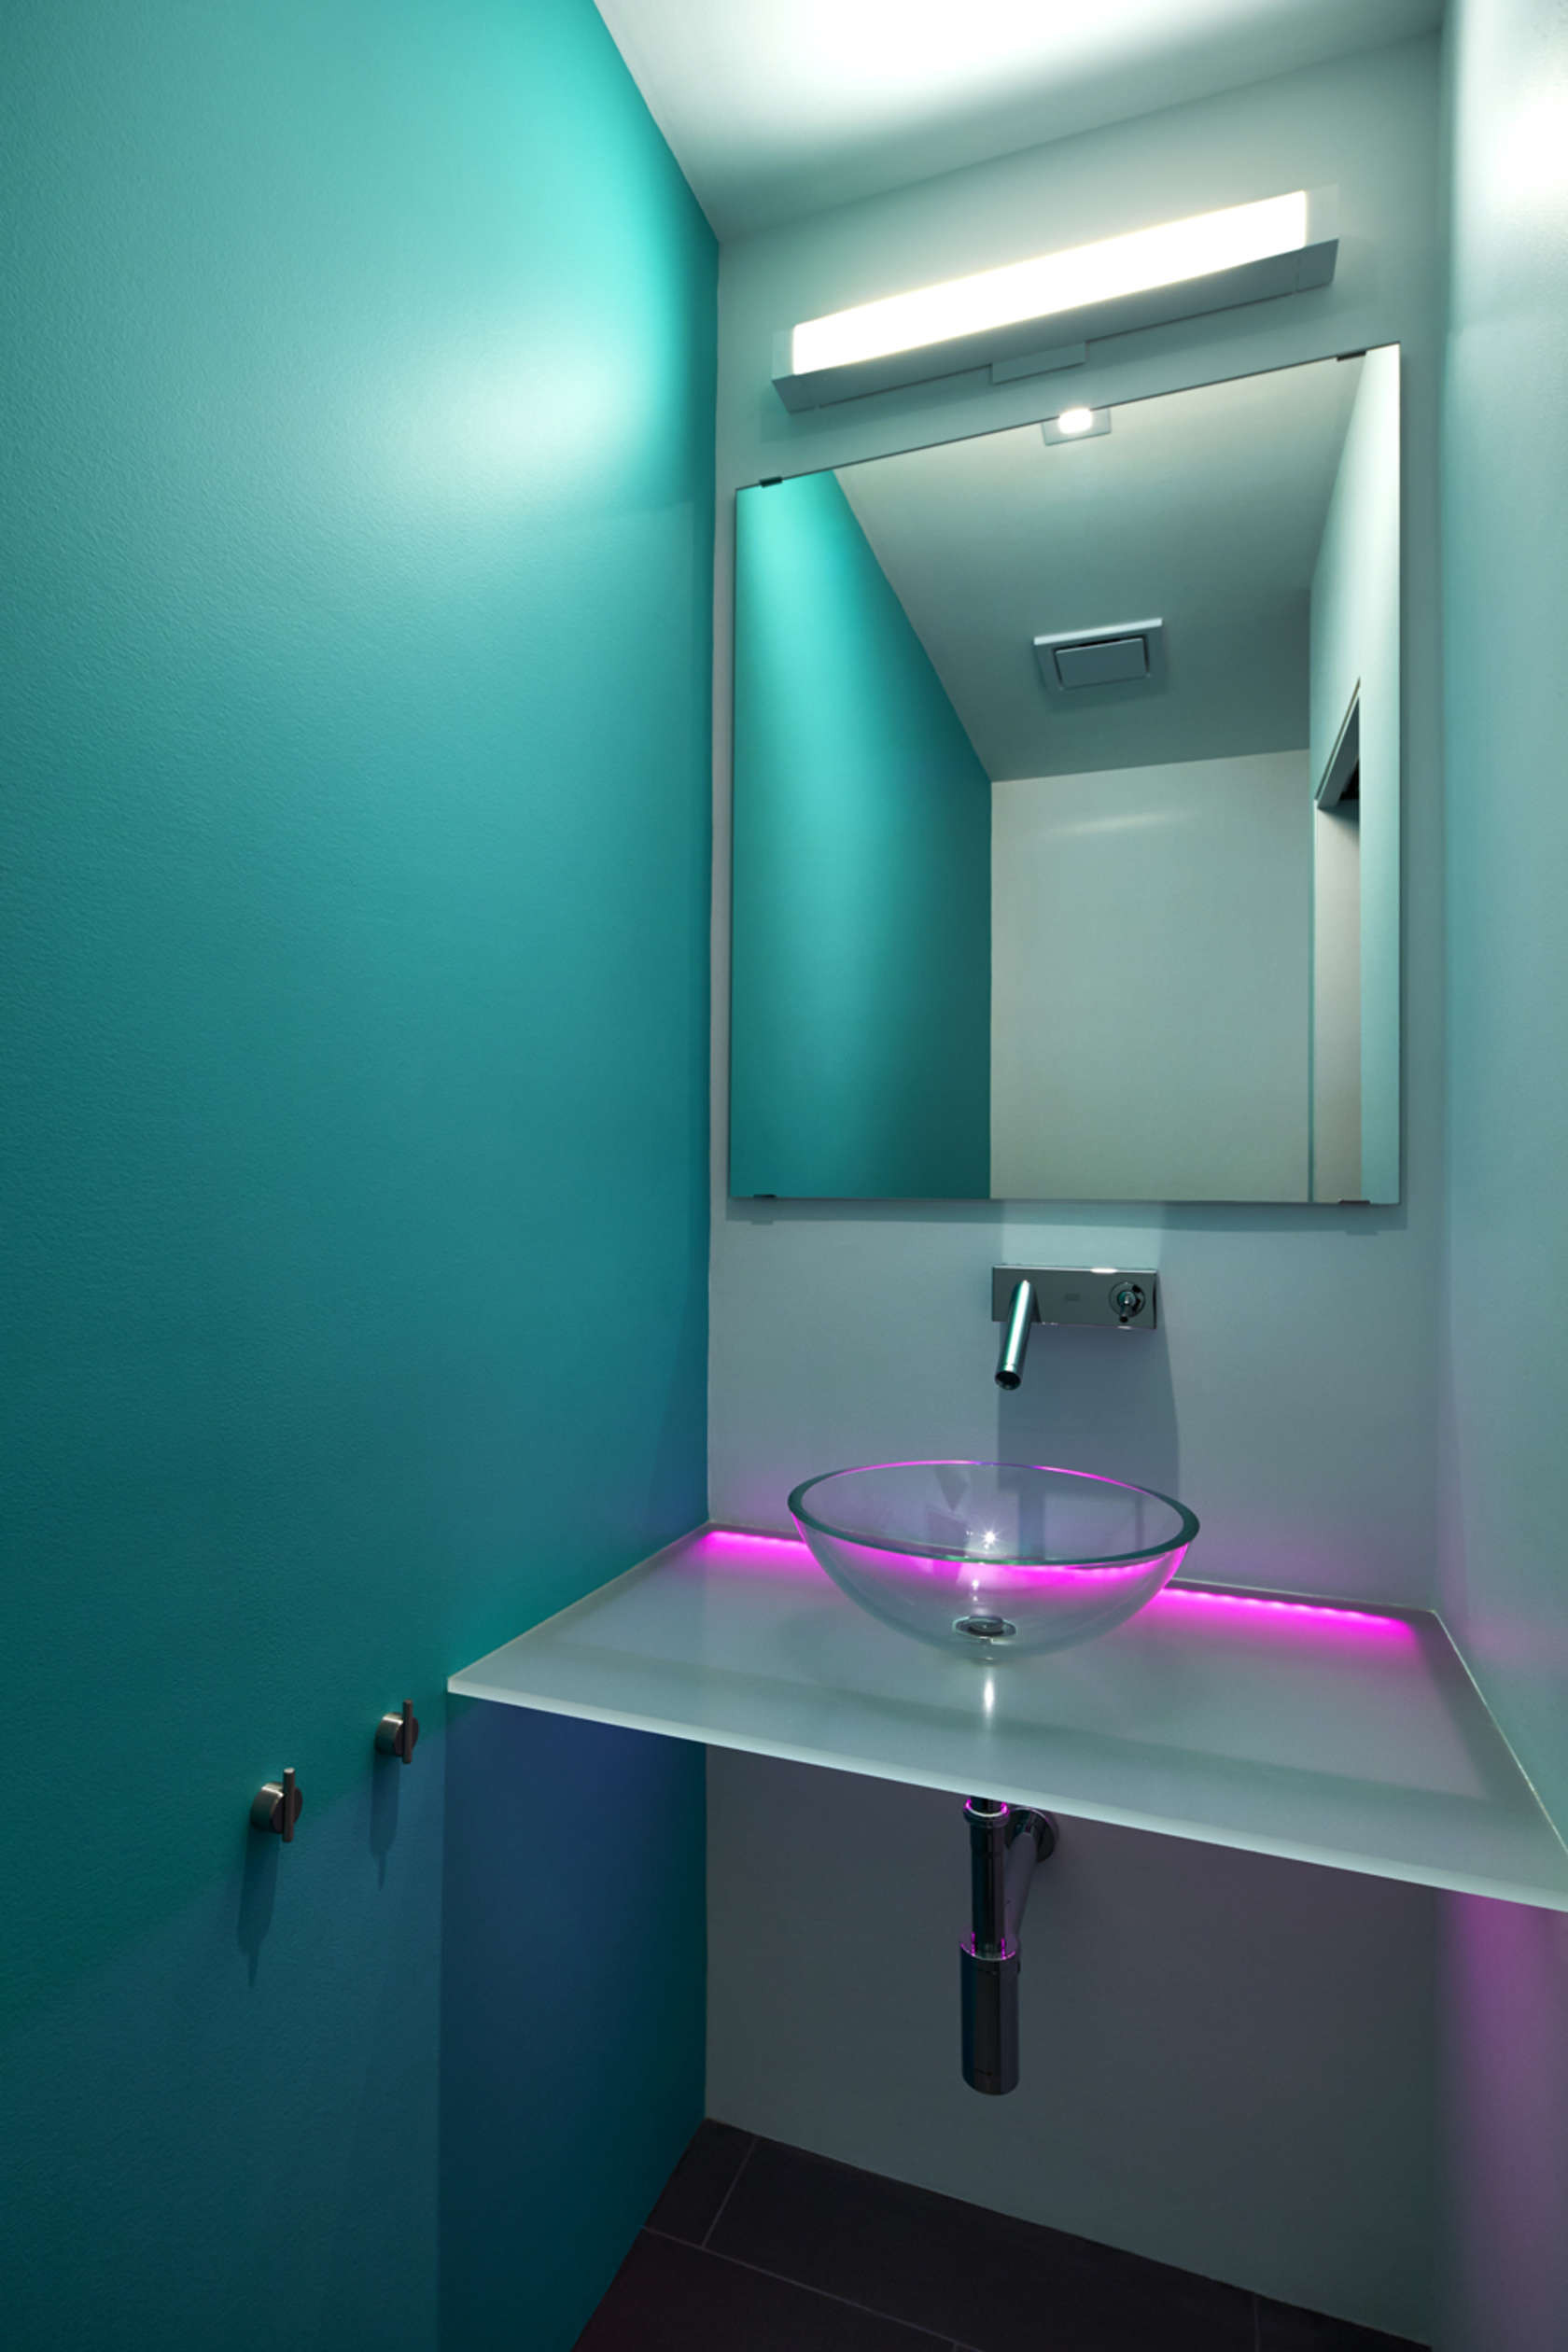 Bathroom Led Lighting
 A Modern Row House for a Fun Couple with a Love of Cooking